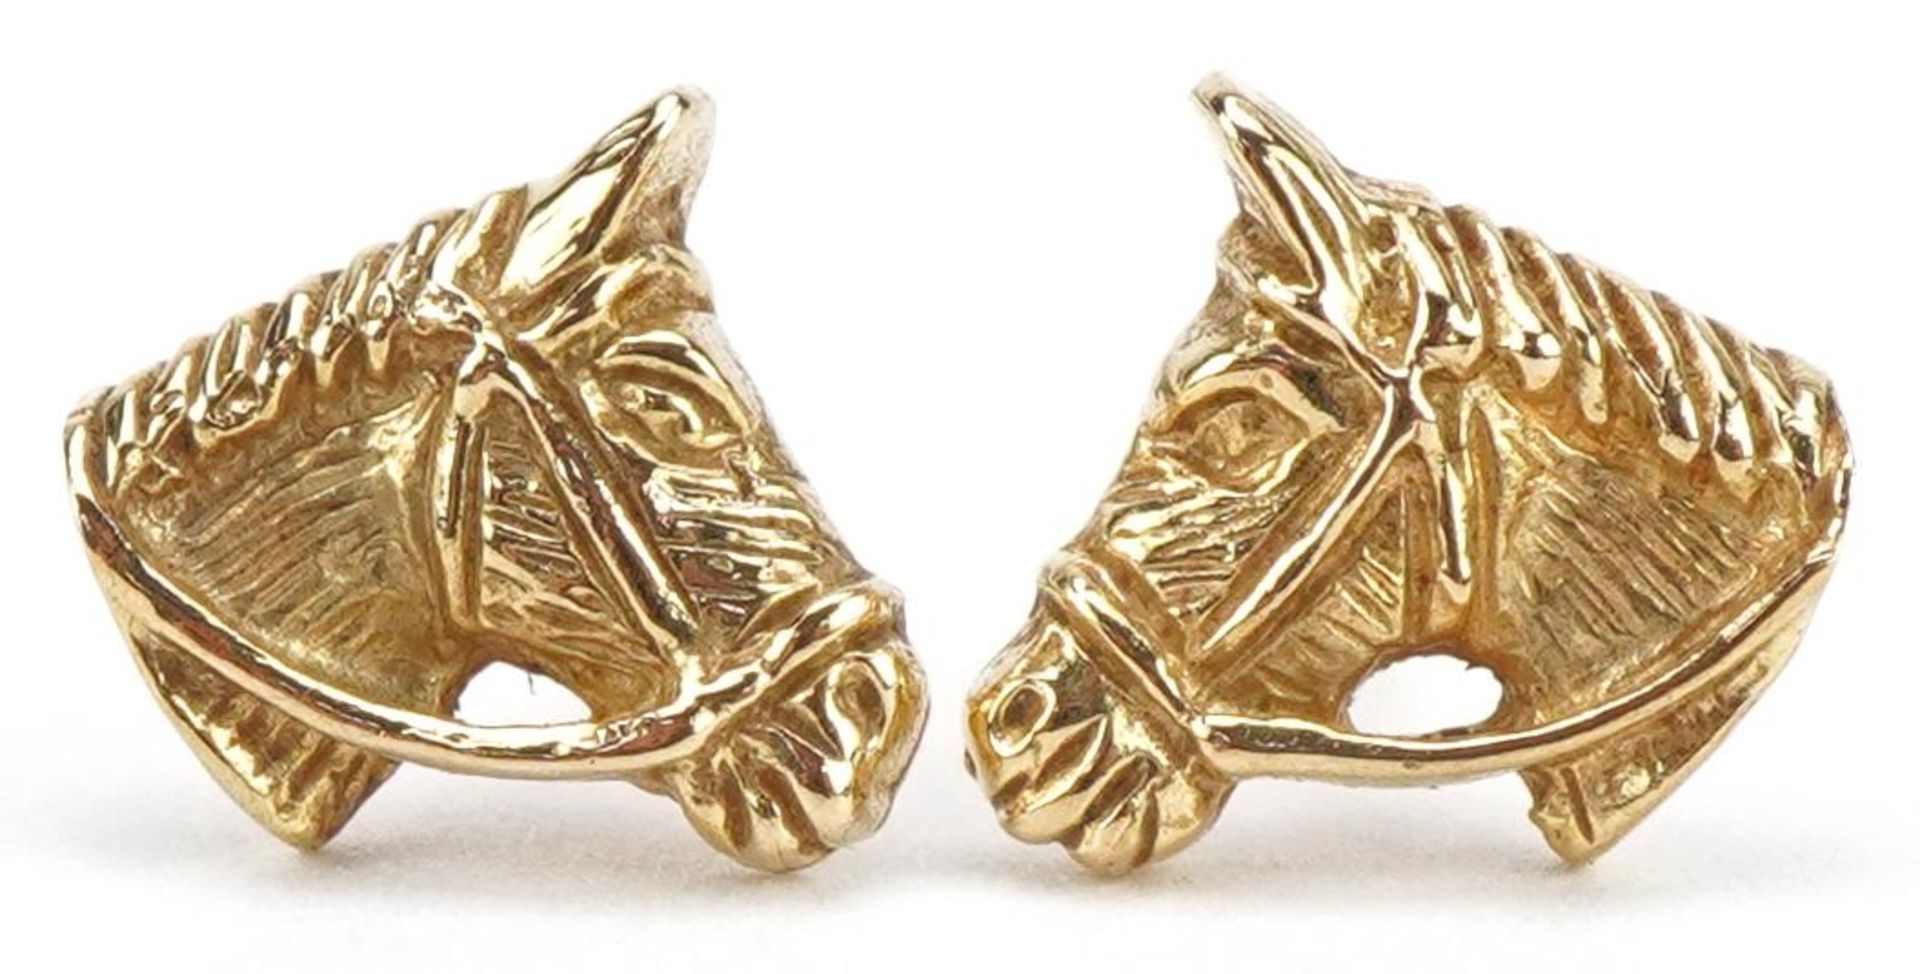 Pair of 9ct gold horsehead stud earrings, 8.5mm wide, 0.8g : For further information on this lot